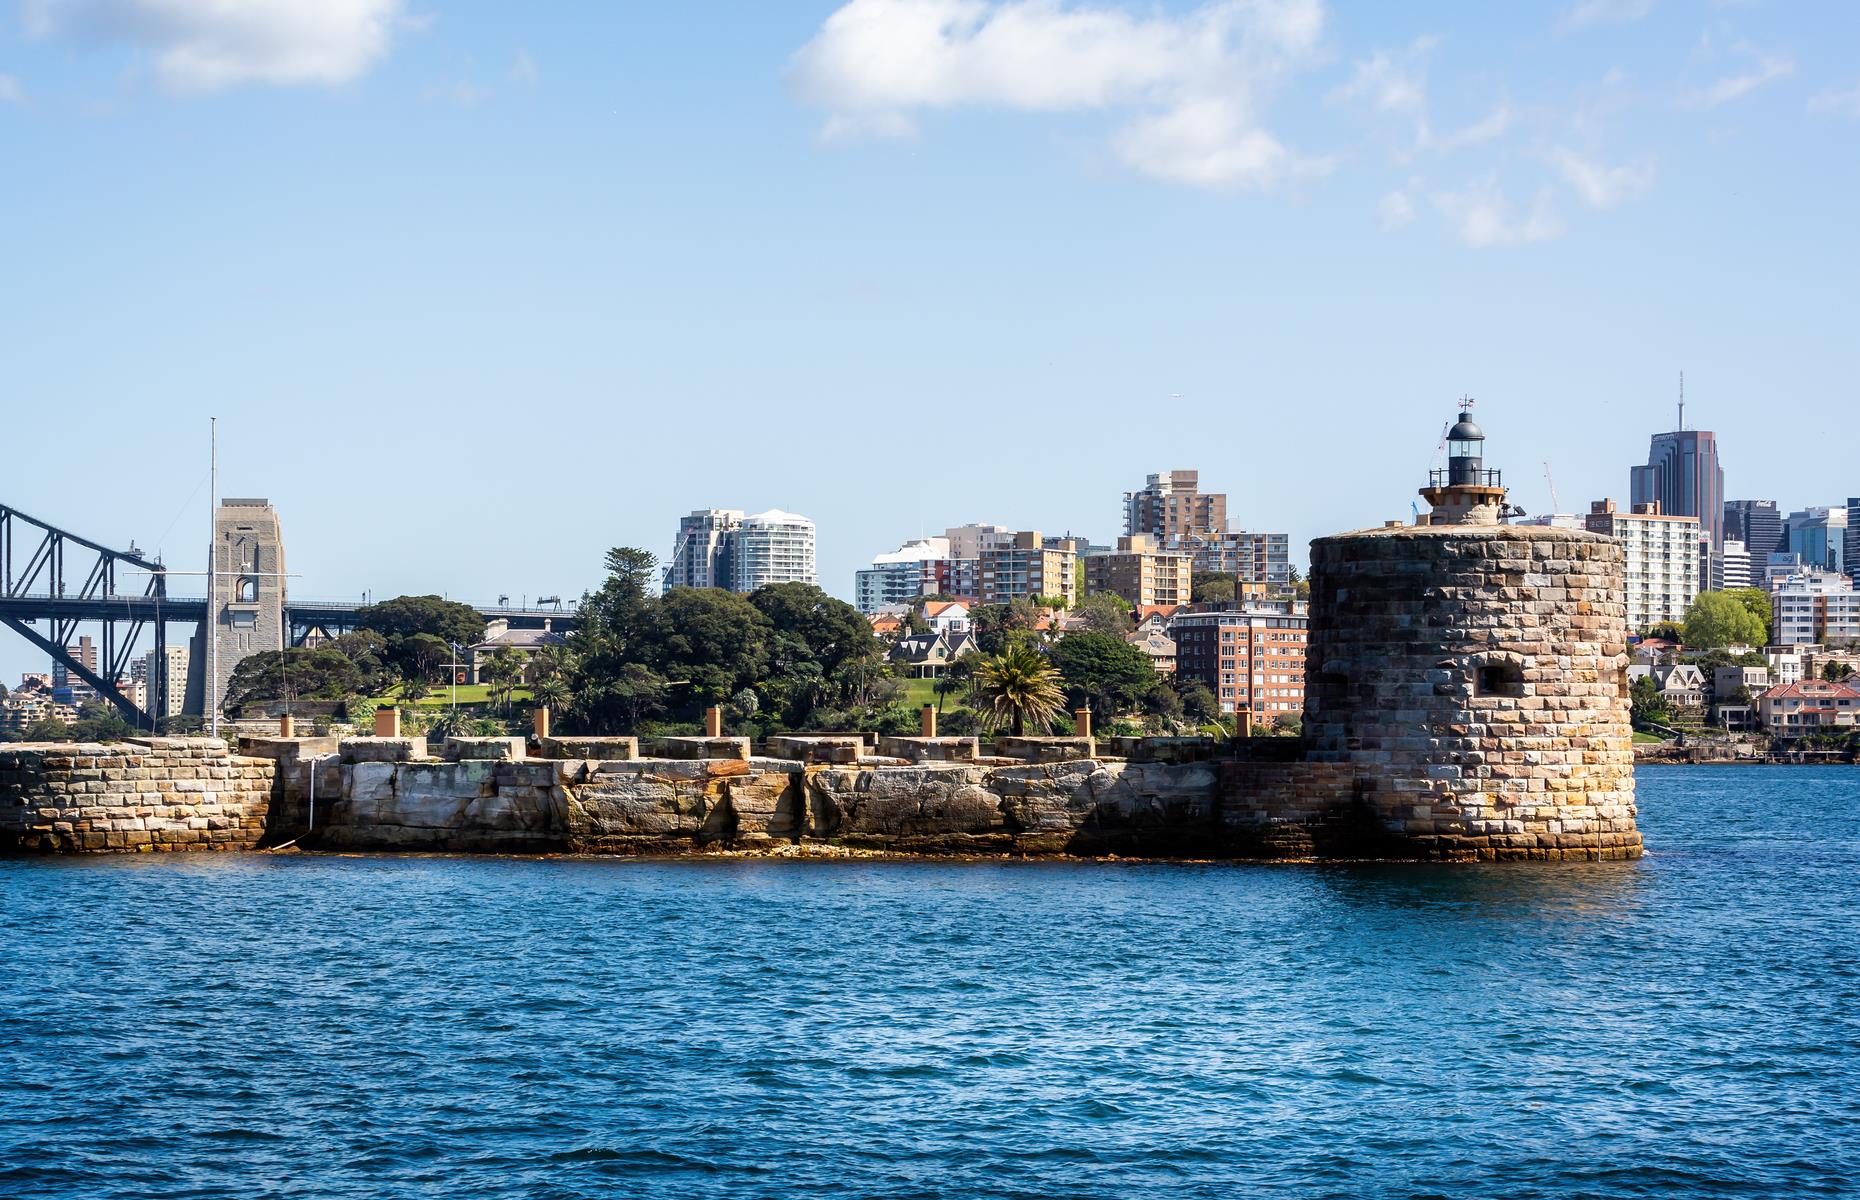 This rocky little island in Sydney Harbour was known as Pinchgut to convicts and colonists and 'Mattewanya' to traditional owners. Fortified from the 1840s, it has the most complete Martello Tower in the world, as well as Australia’s only one. It’s usually possible to visit Fort Denison to explore the fort, museum, gun powder store and winding staircase (though it's currently closed for maintenance and restoration).